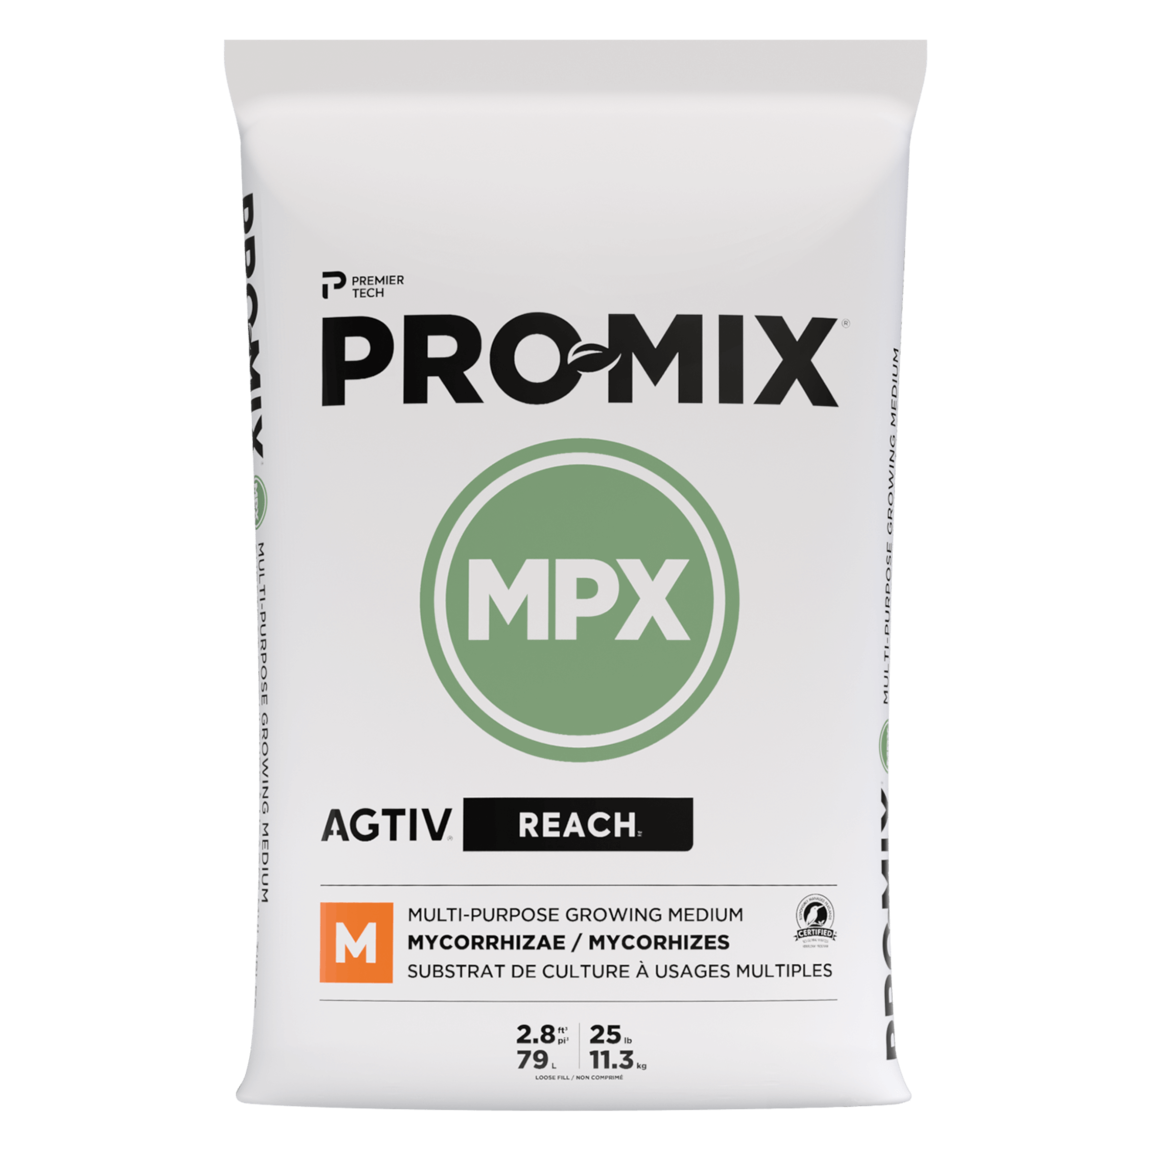 PRO-MIX MPX AGTIV REACH